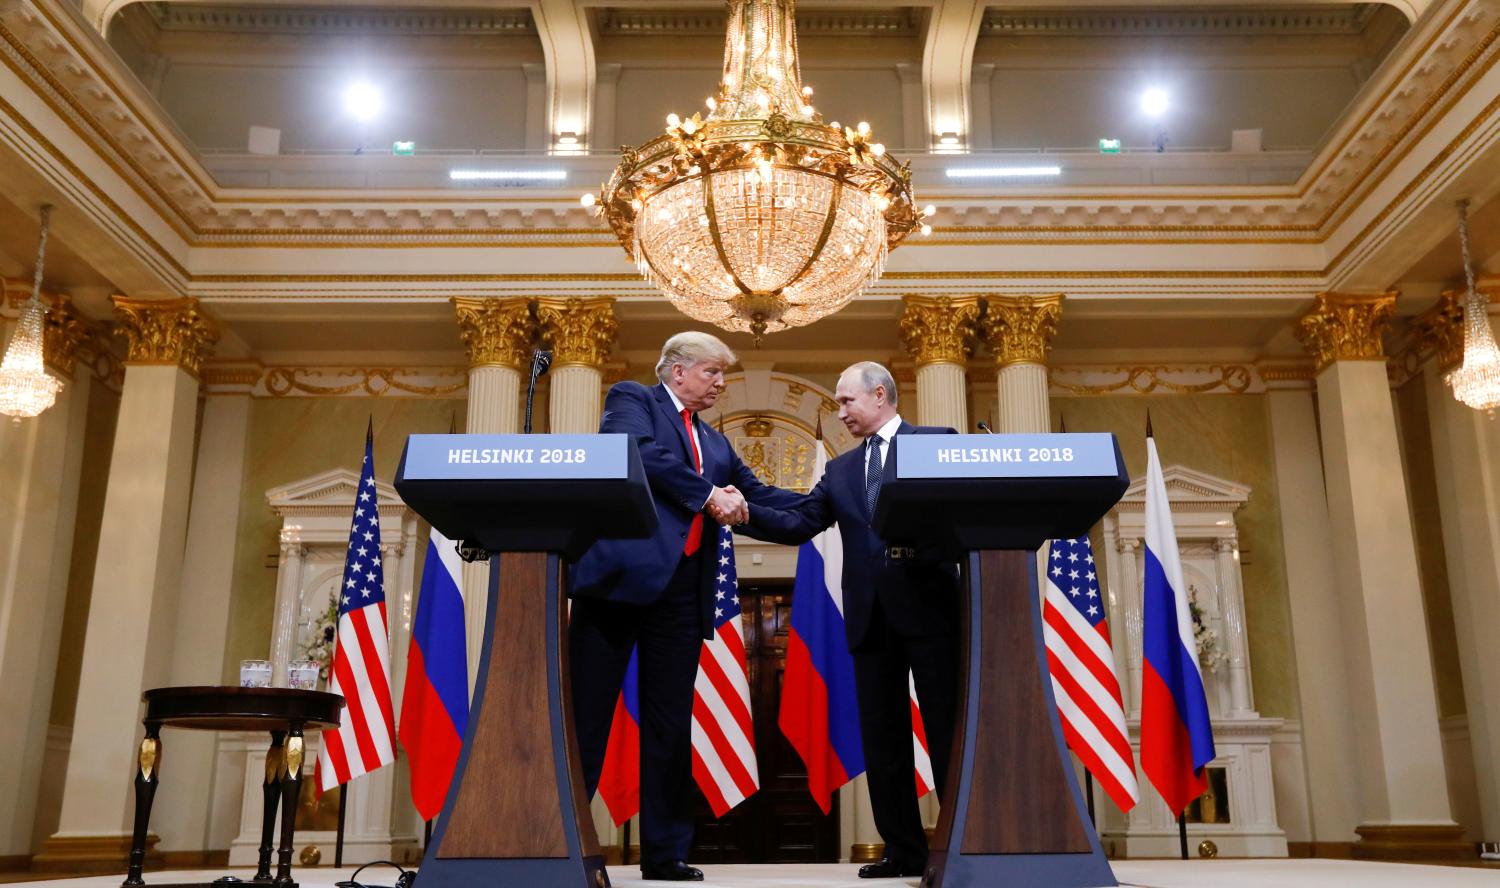 U.S. President Donald Trump and Russia's President Vladimir Putin shake hands during a joint news conference after their meeting in Helsinki, Finland, July 16, 2018. REUTERS/Kevin Lamarque     TPX IMAGES OF THE DAY